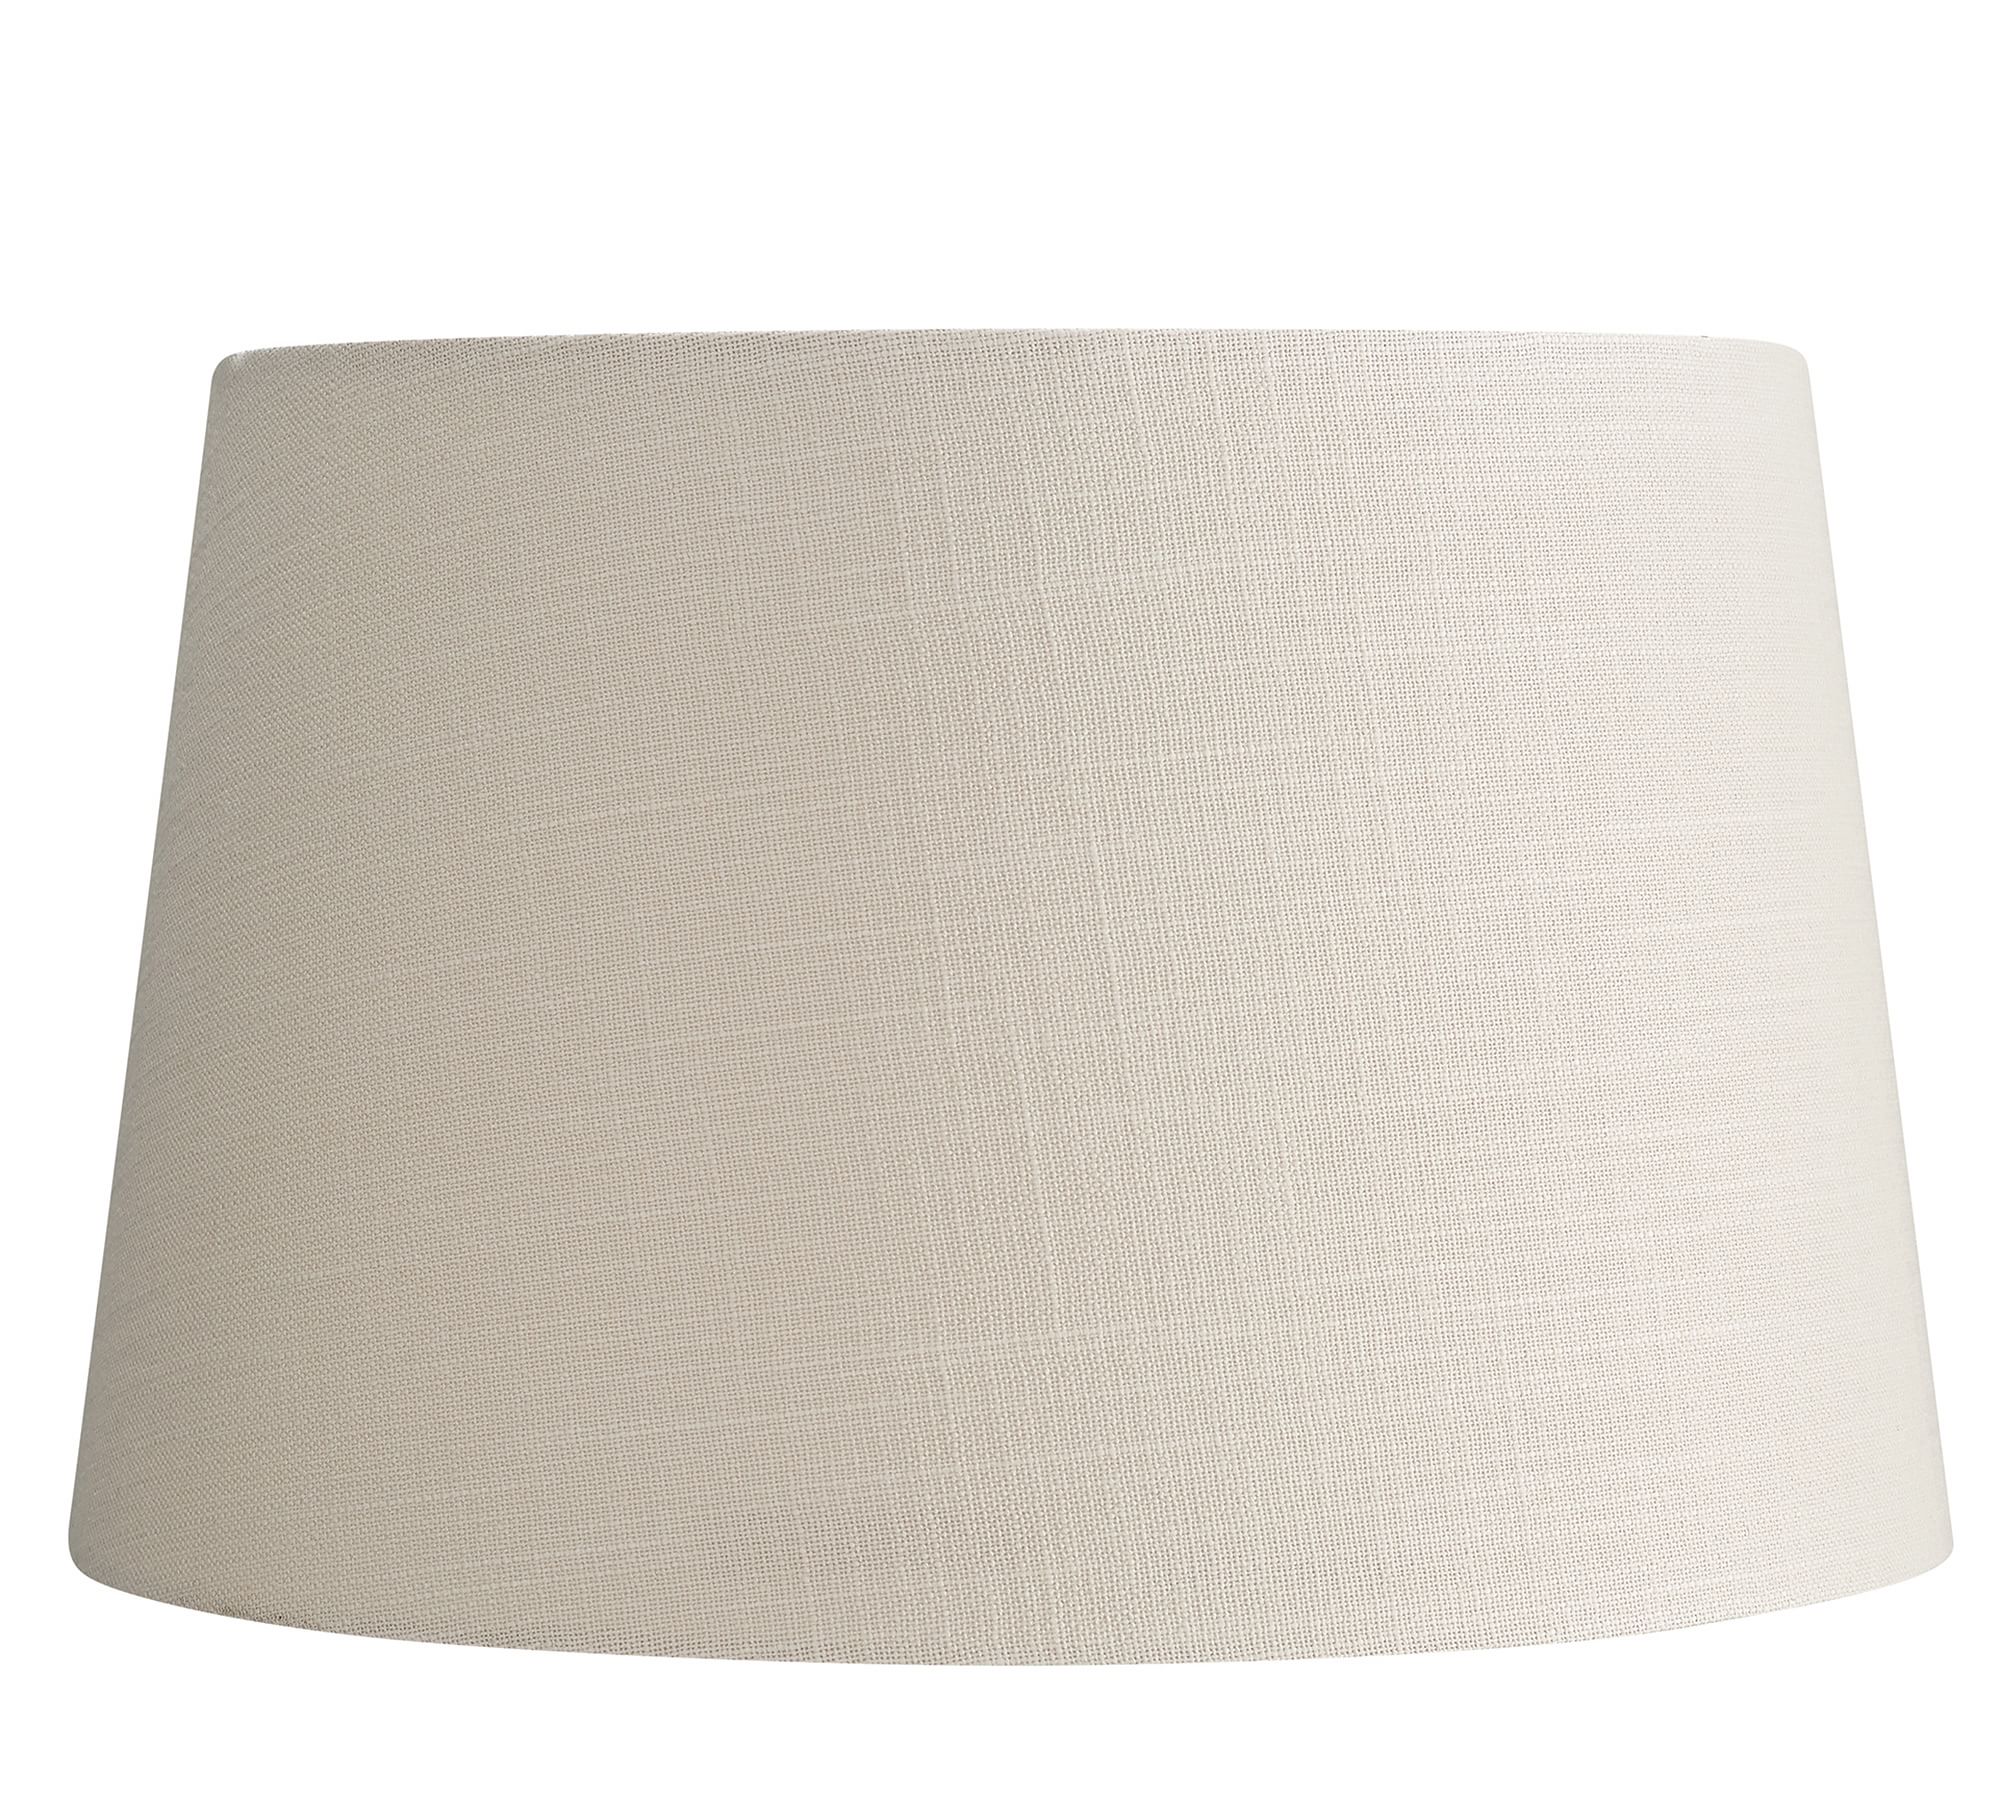 Gallery Tapered Lamp Shade